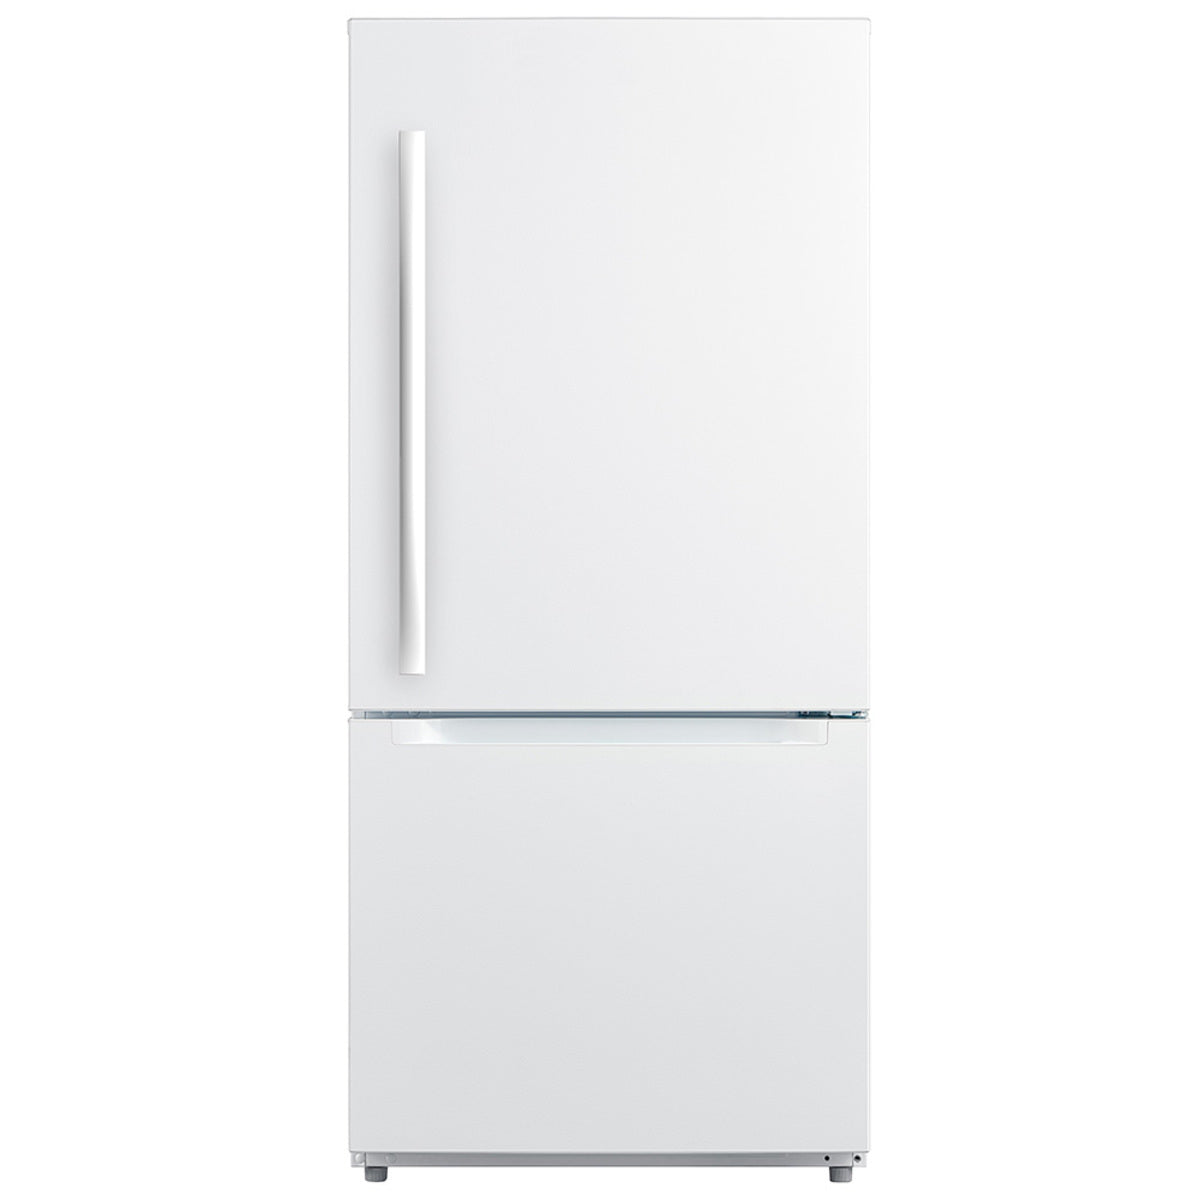 GE - 29.5 Inch 18.6 cu. ft Bottom Mount Refrigerator in White - MDE19DTNKWW